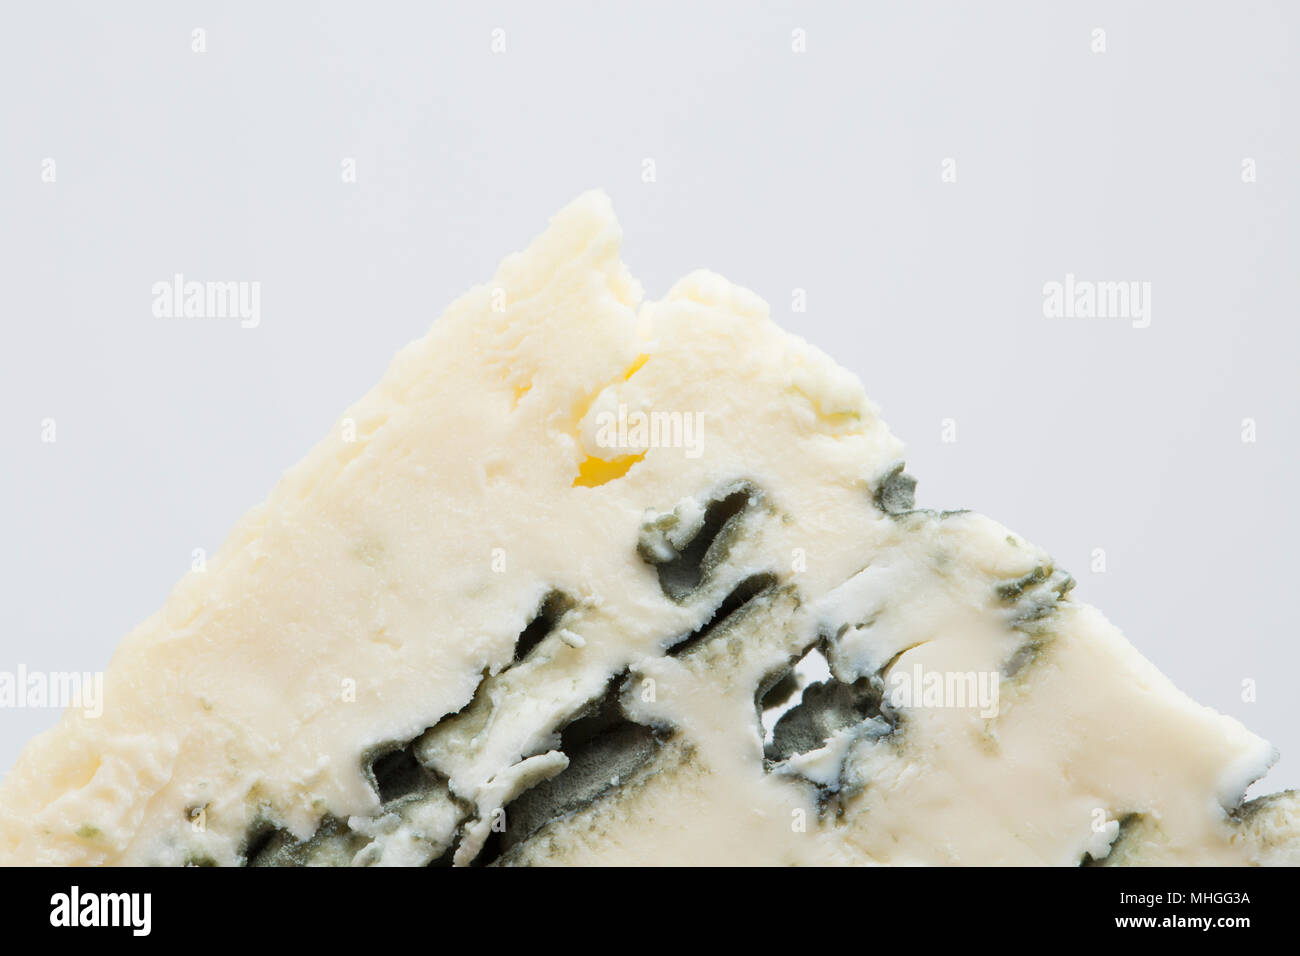 French Saint Agur cheese bought from a supermarket in the UK. Saint Agur is a blue cheese made from cows milk that comes from the Auvergne region of F Stock Photo